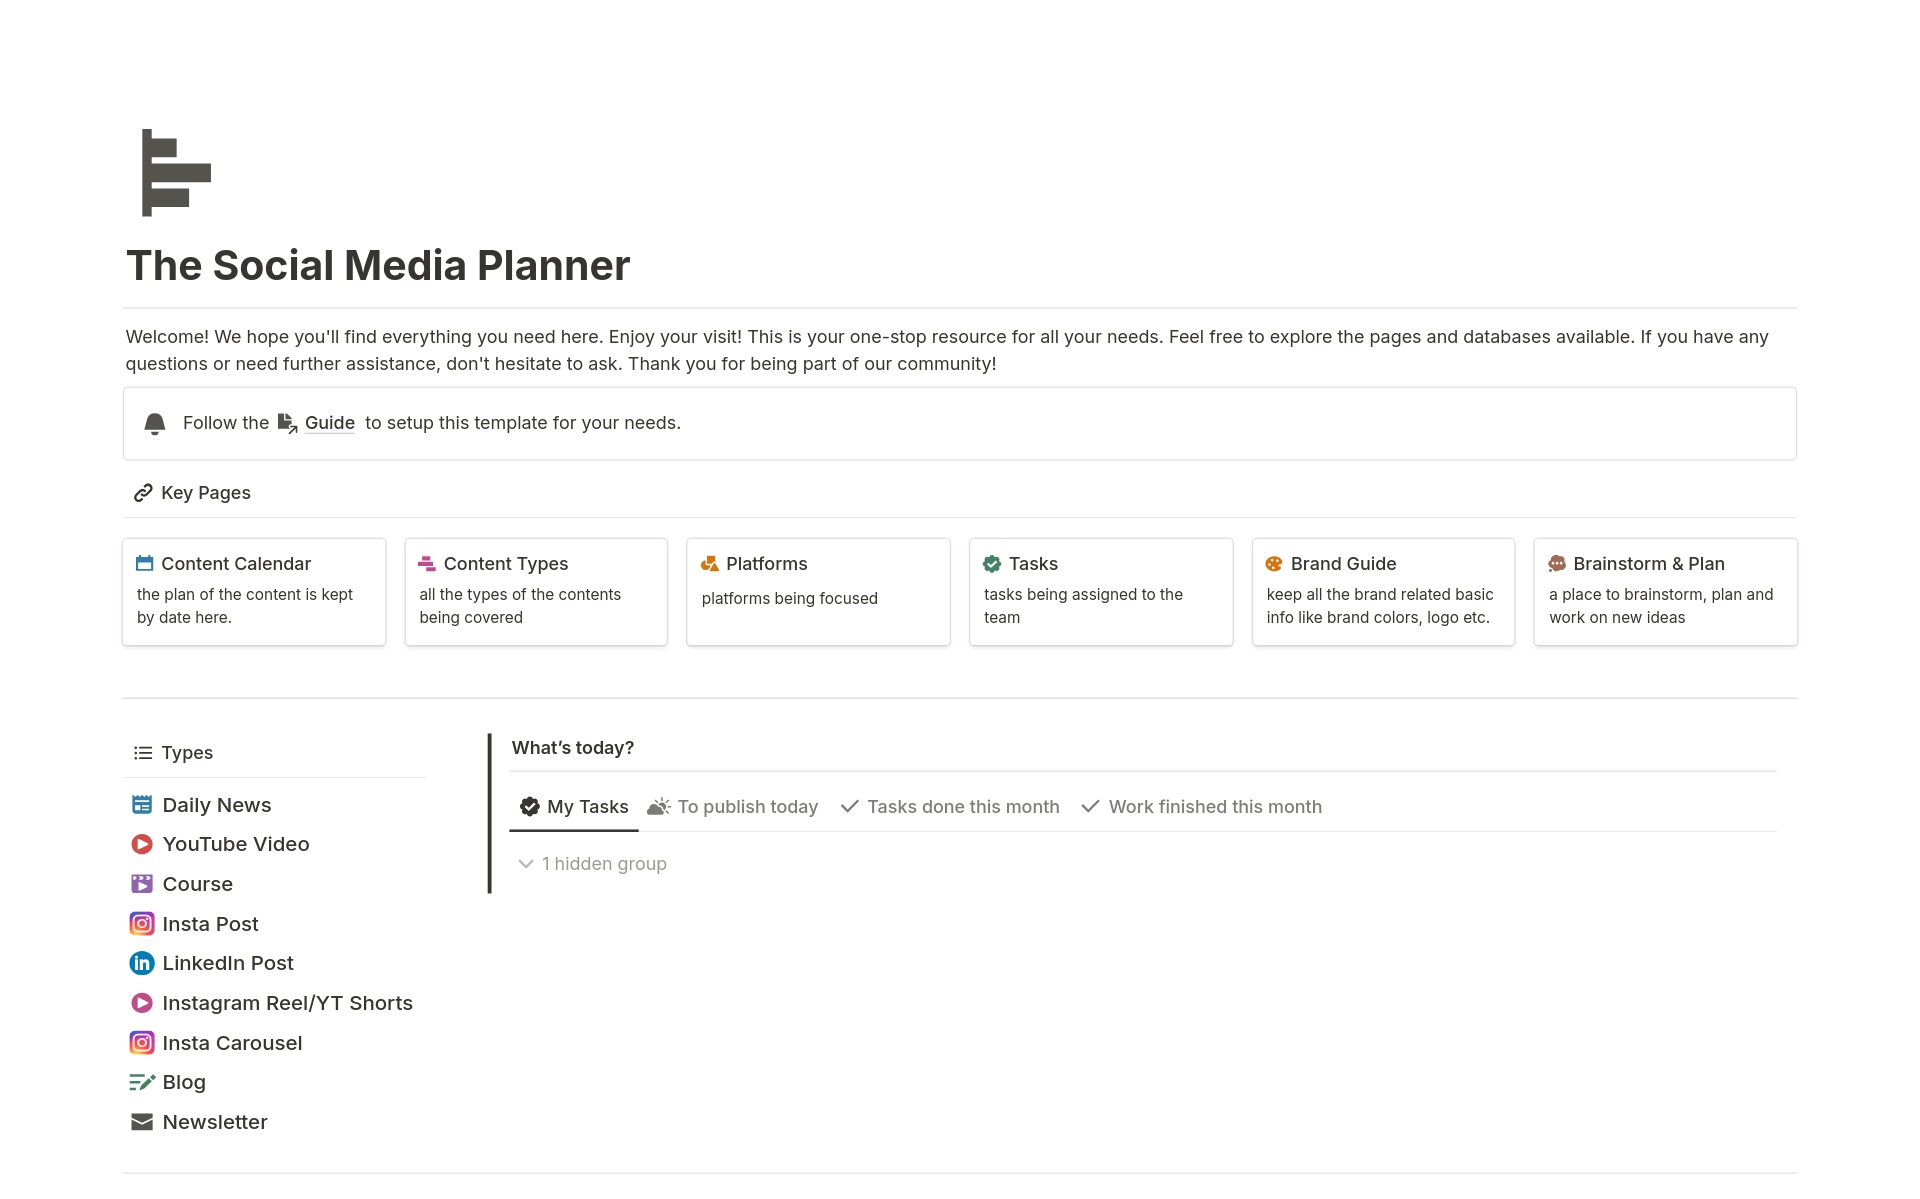 An ultimate social media manager for your team/business that includes content calendar to plan, organize, and visualize your posts effortlessly for facebook, Instagram to LinkedIn, YouTube, Instagram, etc. got all covered. All that can be easily added and edited.